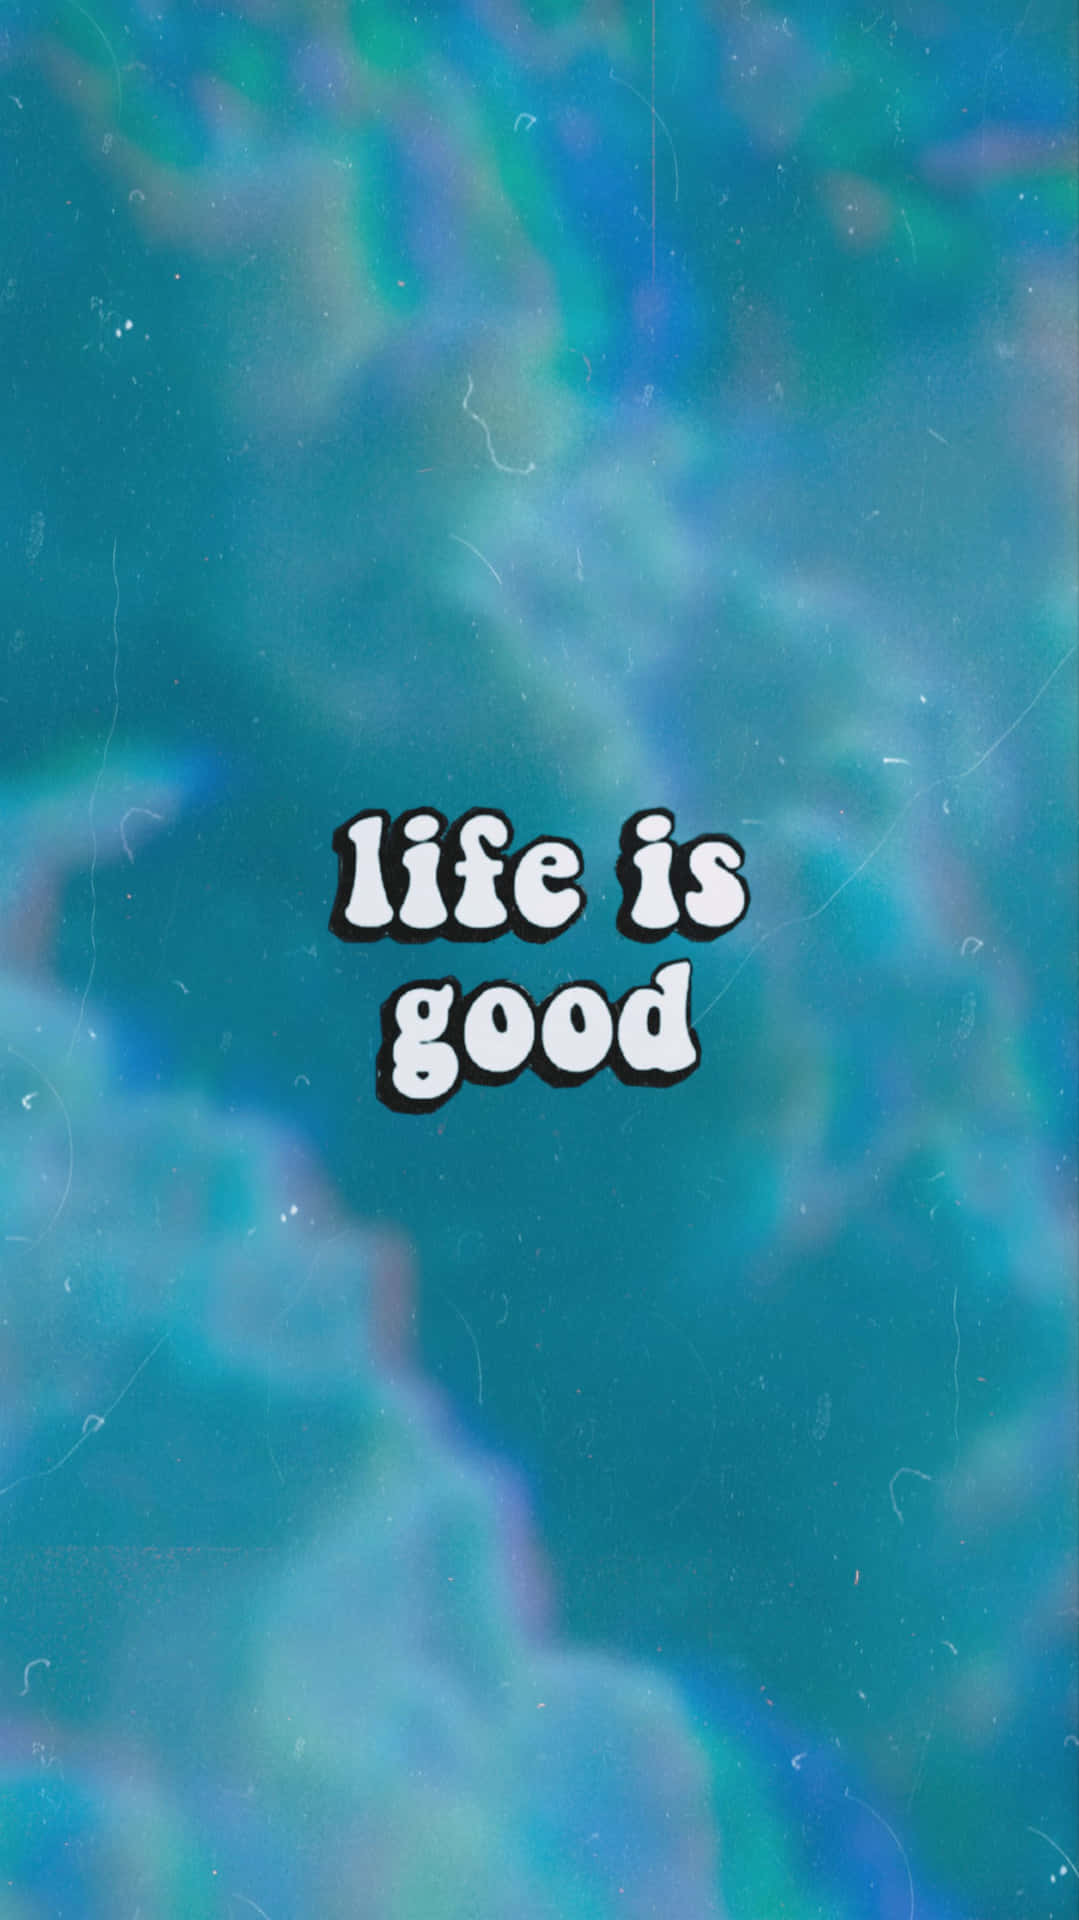 Free Life Is Good Wallpaper Downloads, [100+] Life Is Good Wallpapers for  FREE 